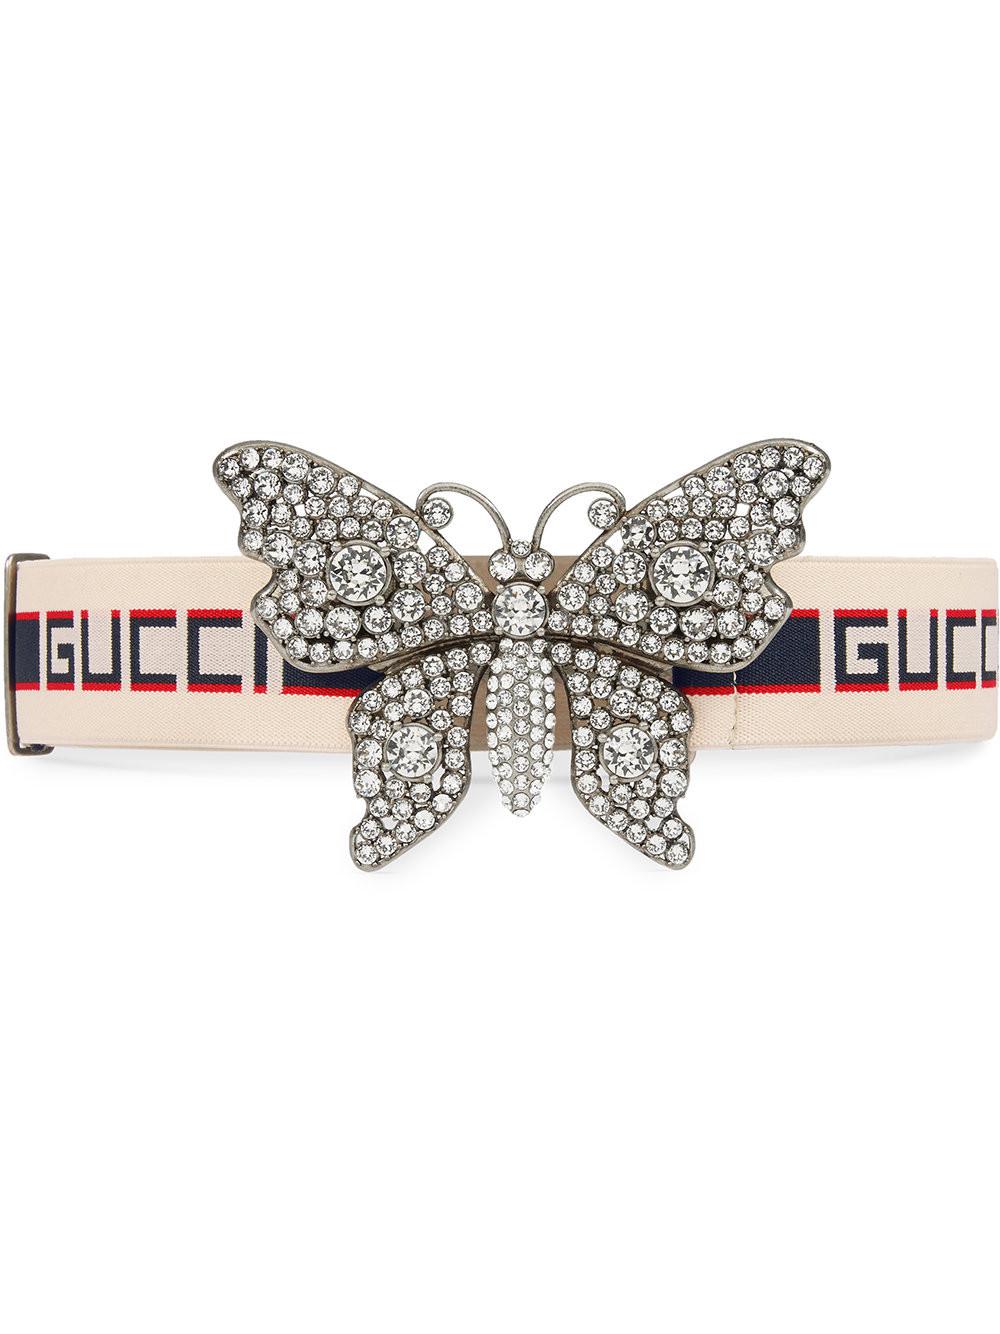 Gucci Stripe Belt With Butterfly | Lyst